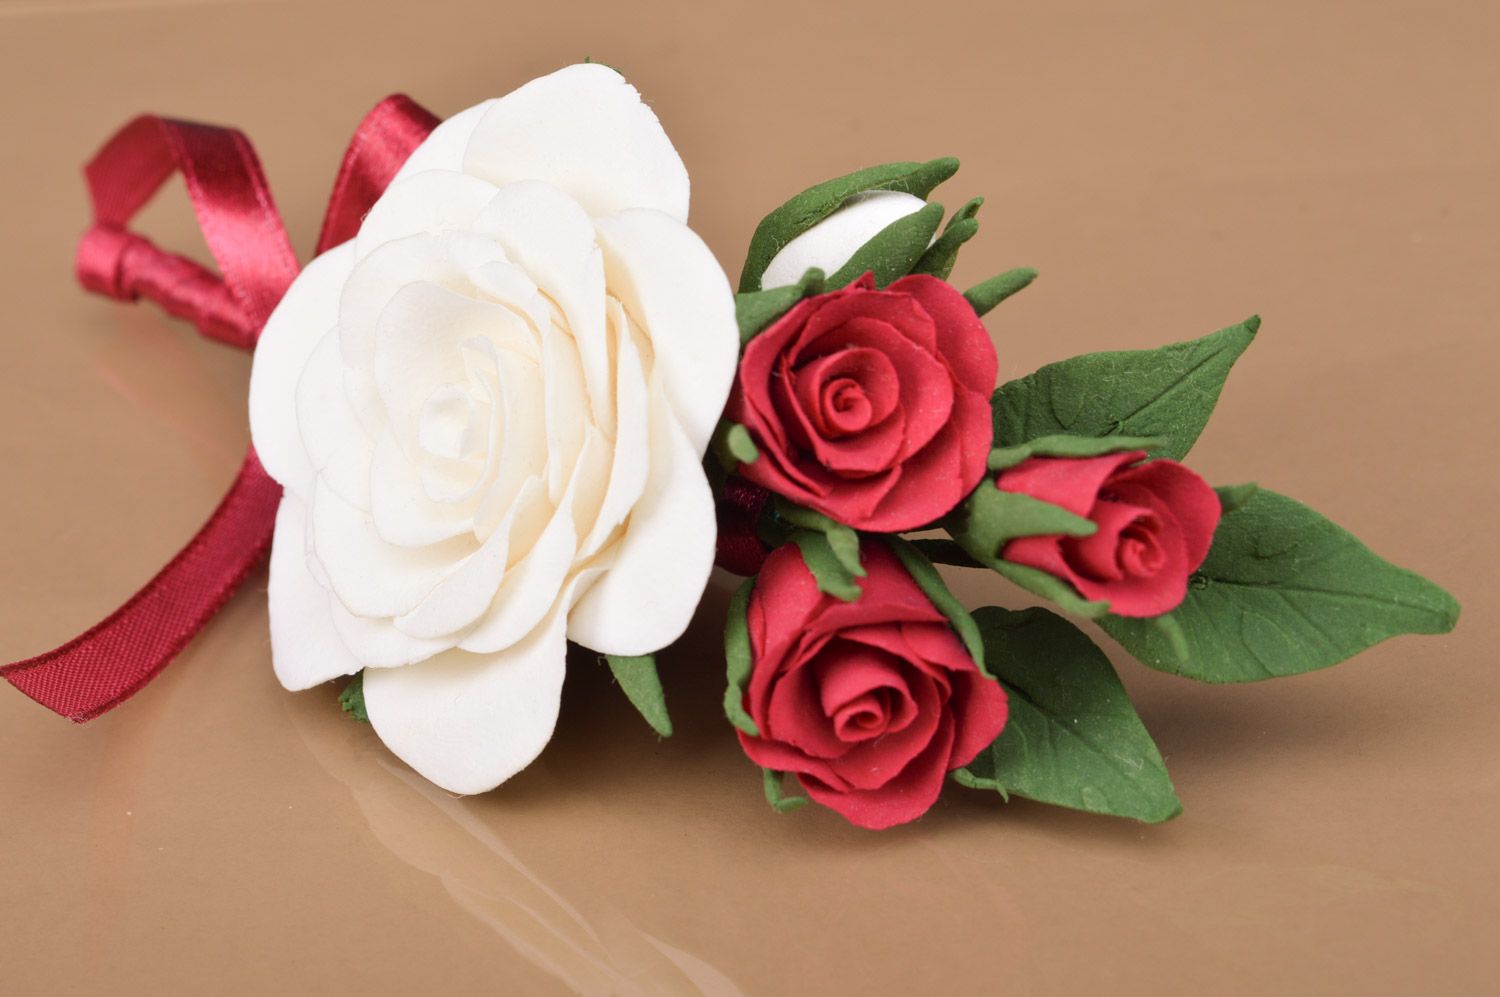 Handmade beautiful polymer clay wedding bouttoniere with white and red roses photo 3